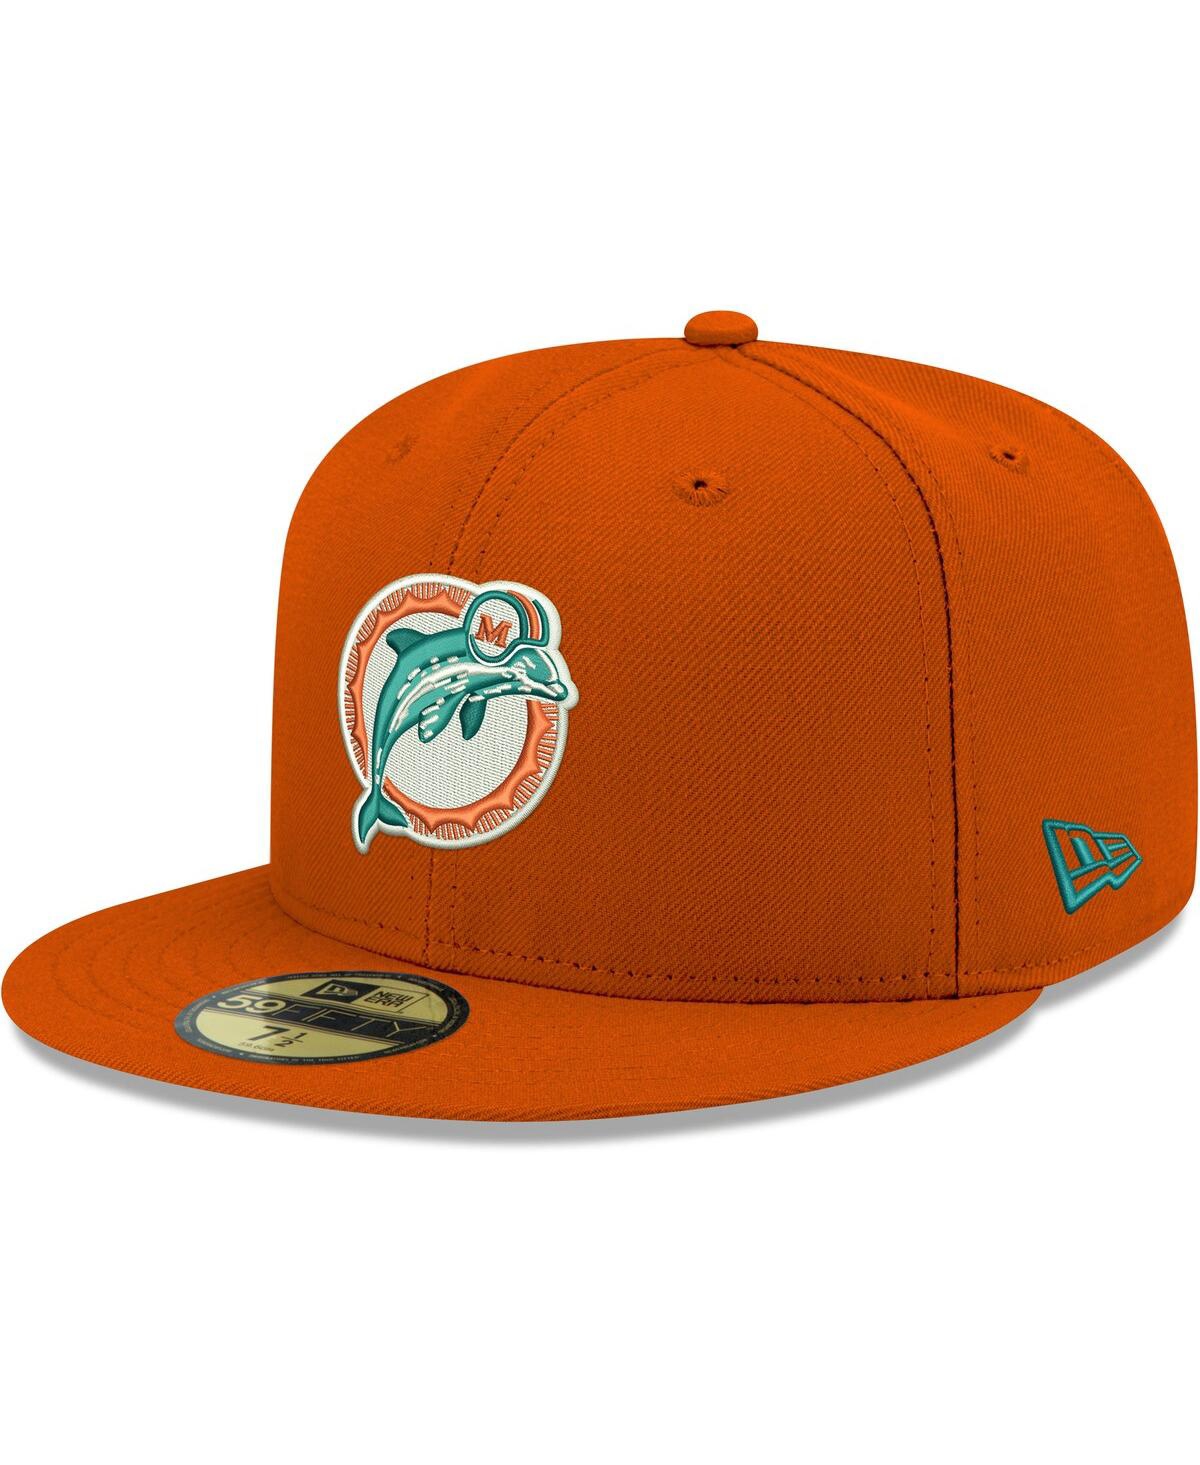 Shop New Era Men's Orange Miami Dolphins Omaha Throwback 59fifty Fitted Hat